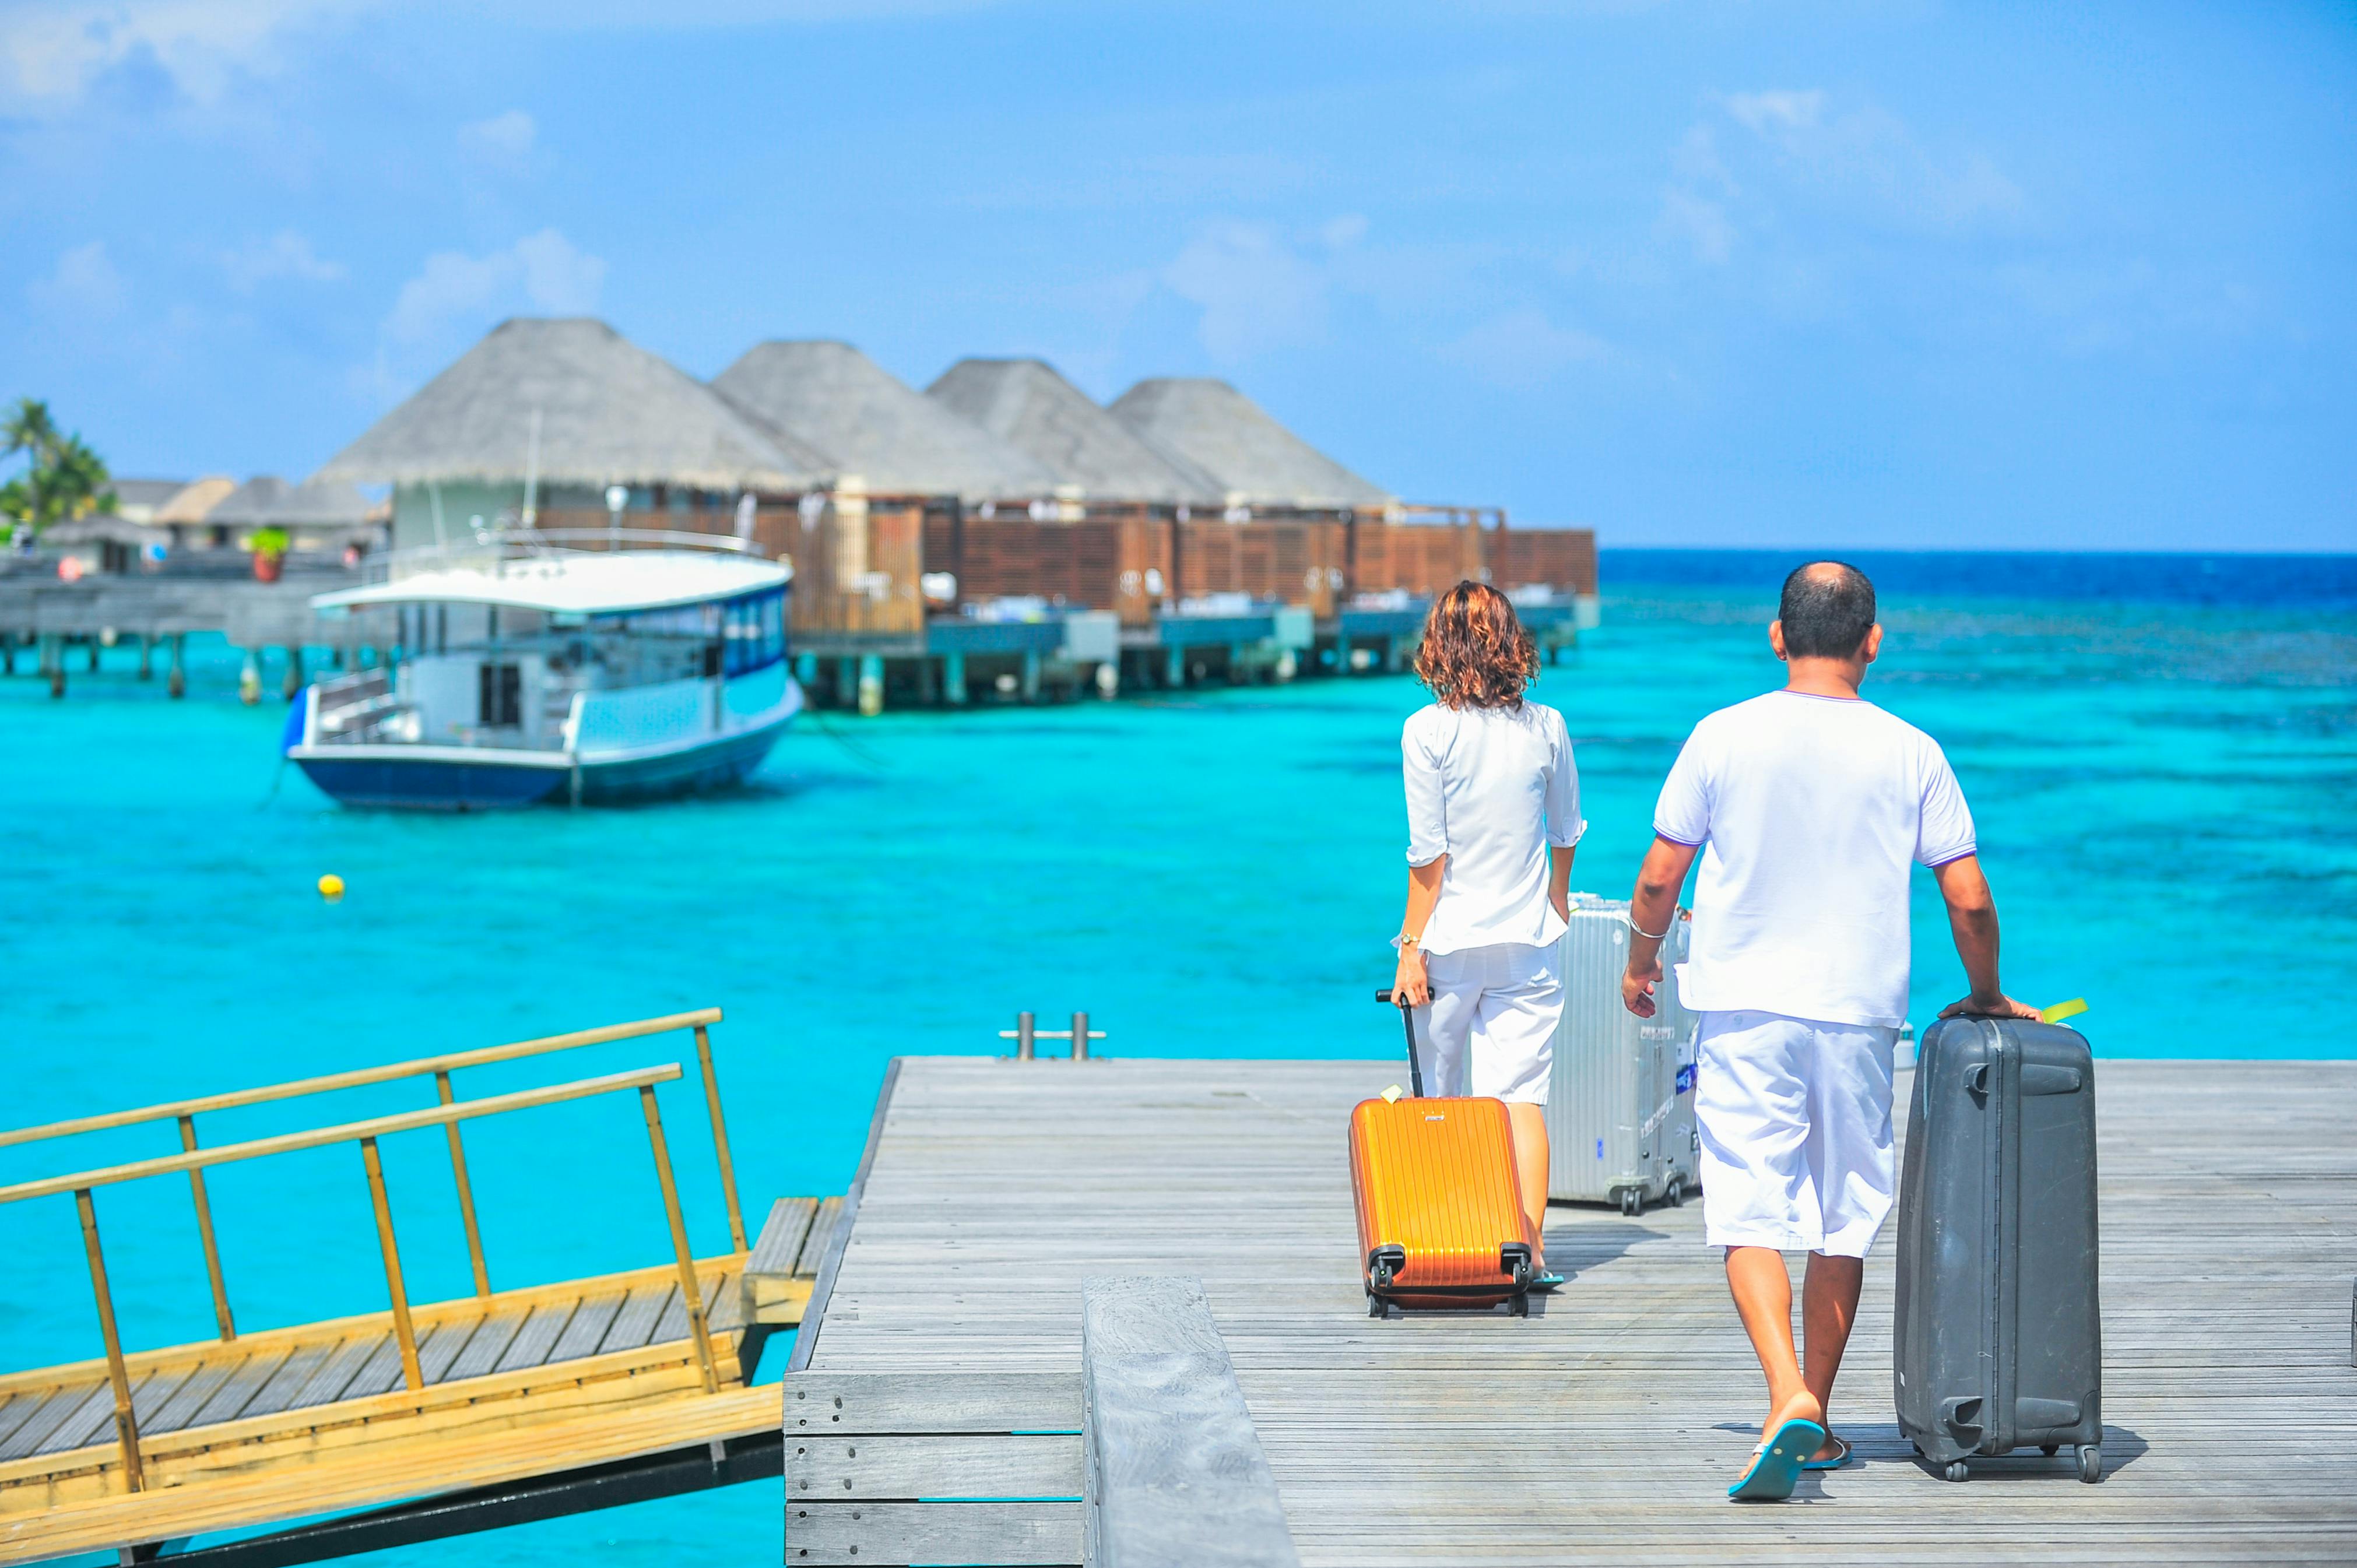 A man and a woman walking on the dock with suitcases | Source: Pexels